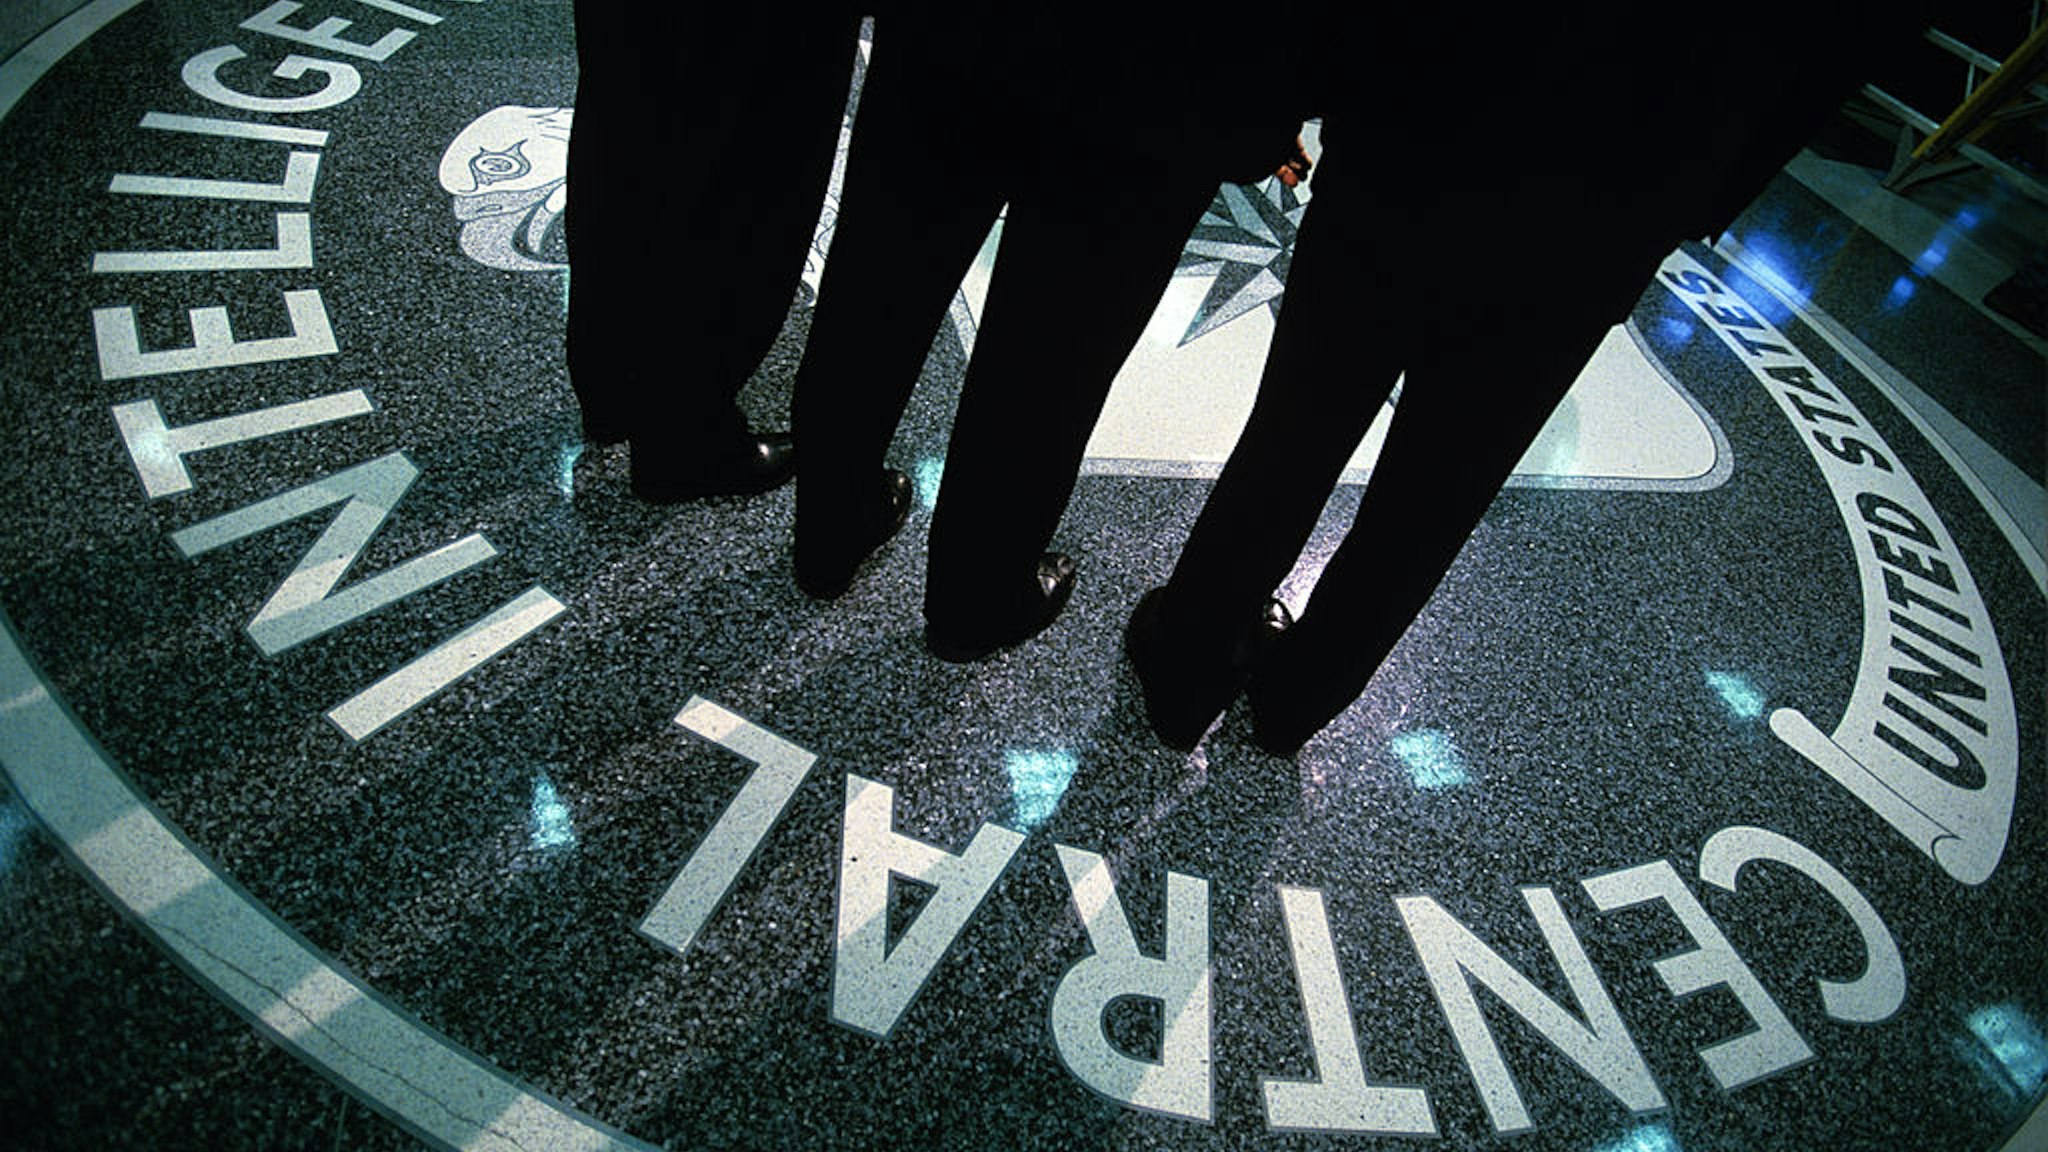 LANGLEY, VA - JULY 9: The CIA symbol is shown on the floor of CIA Headquarters, July 9, 2004 at CIA headquarters in Langley, Virginia. Earlier today the Senate Intelligence Committee released its report on the numerous failures in the CIA reporting of alleged Iraqi weapons of mass destruction.